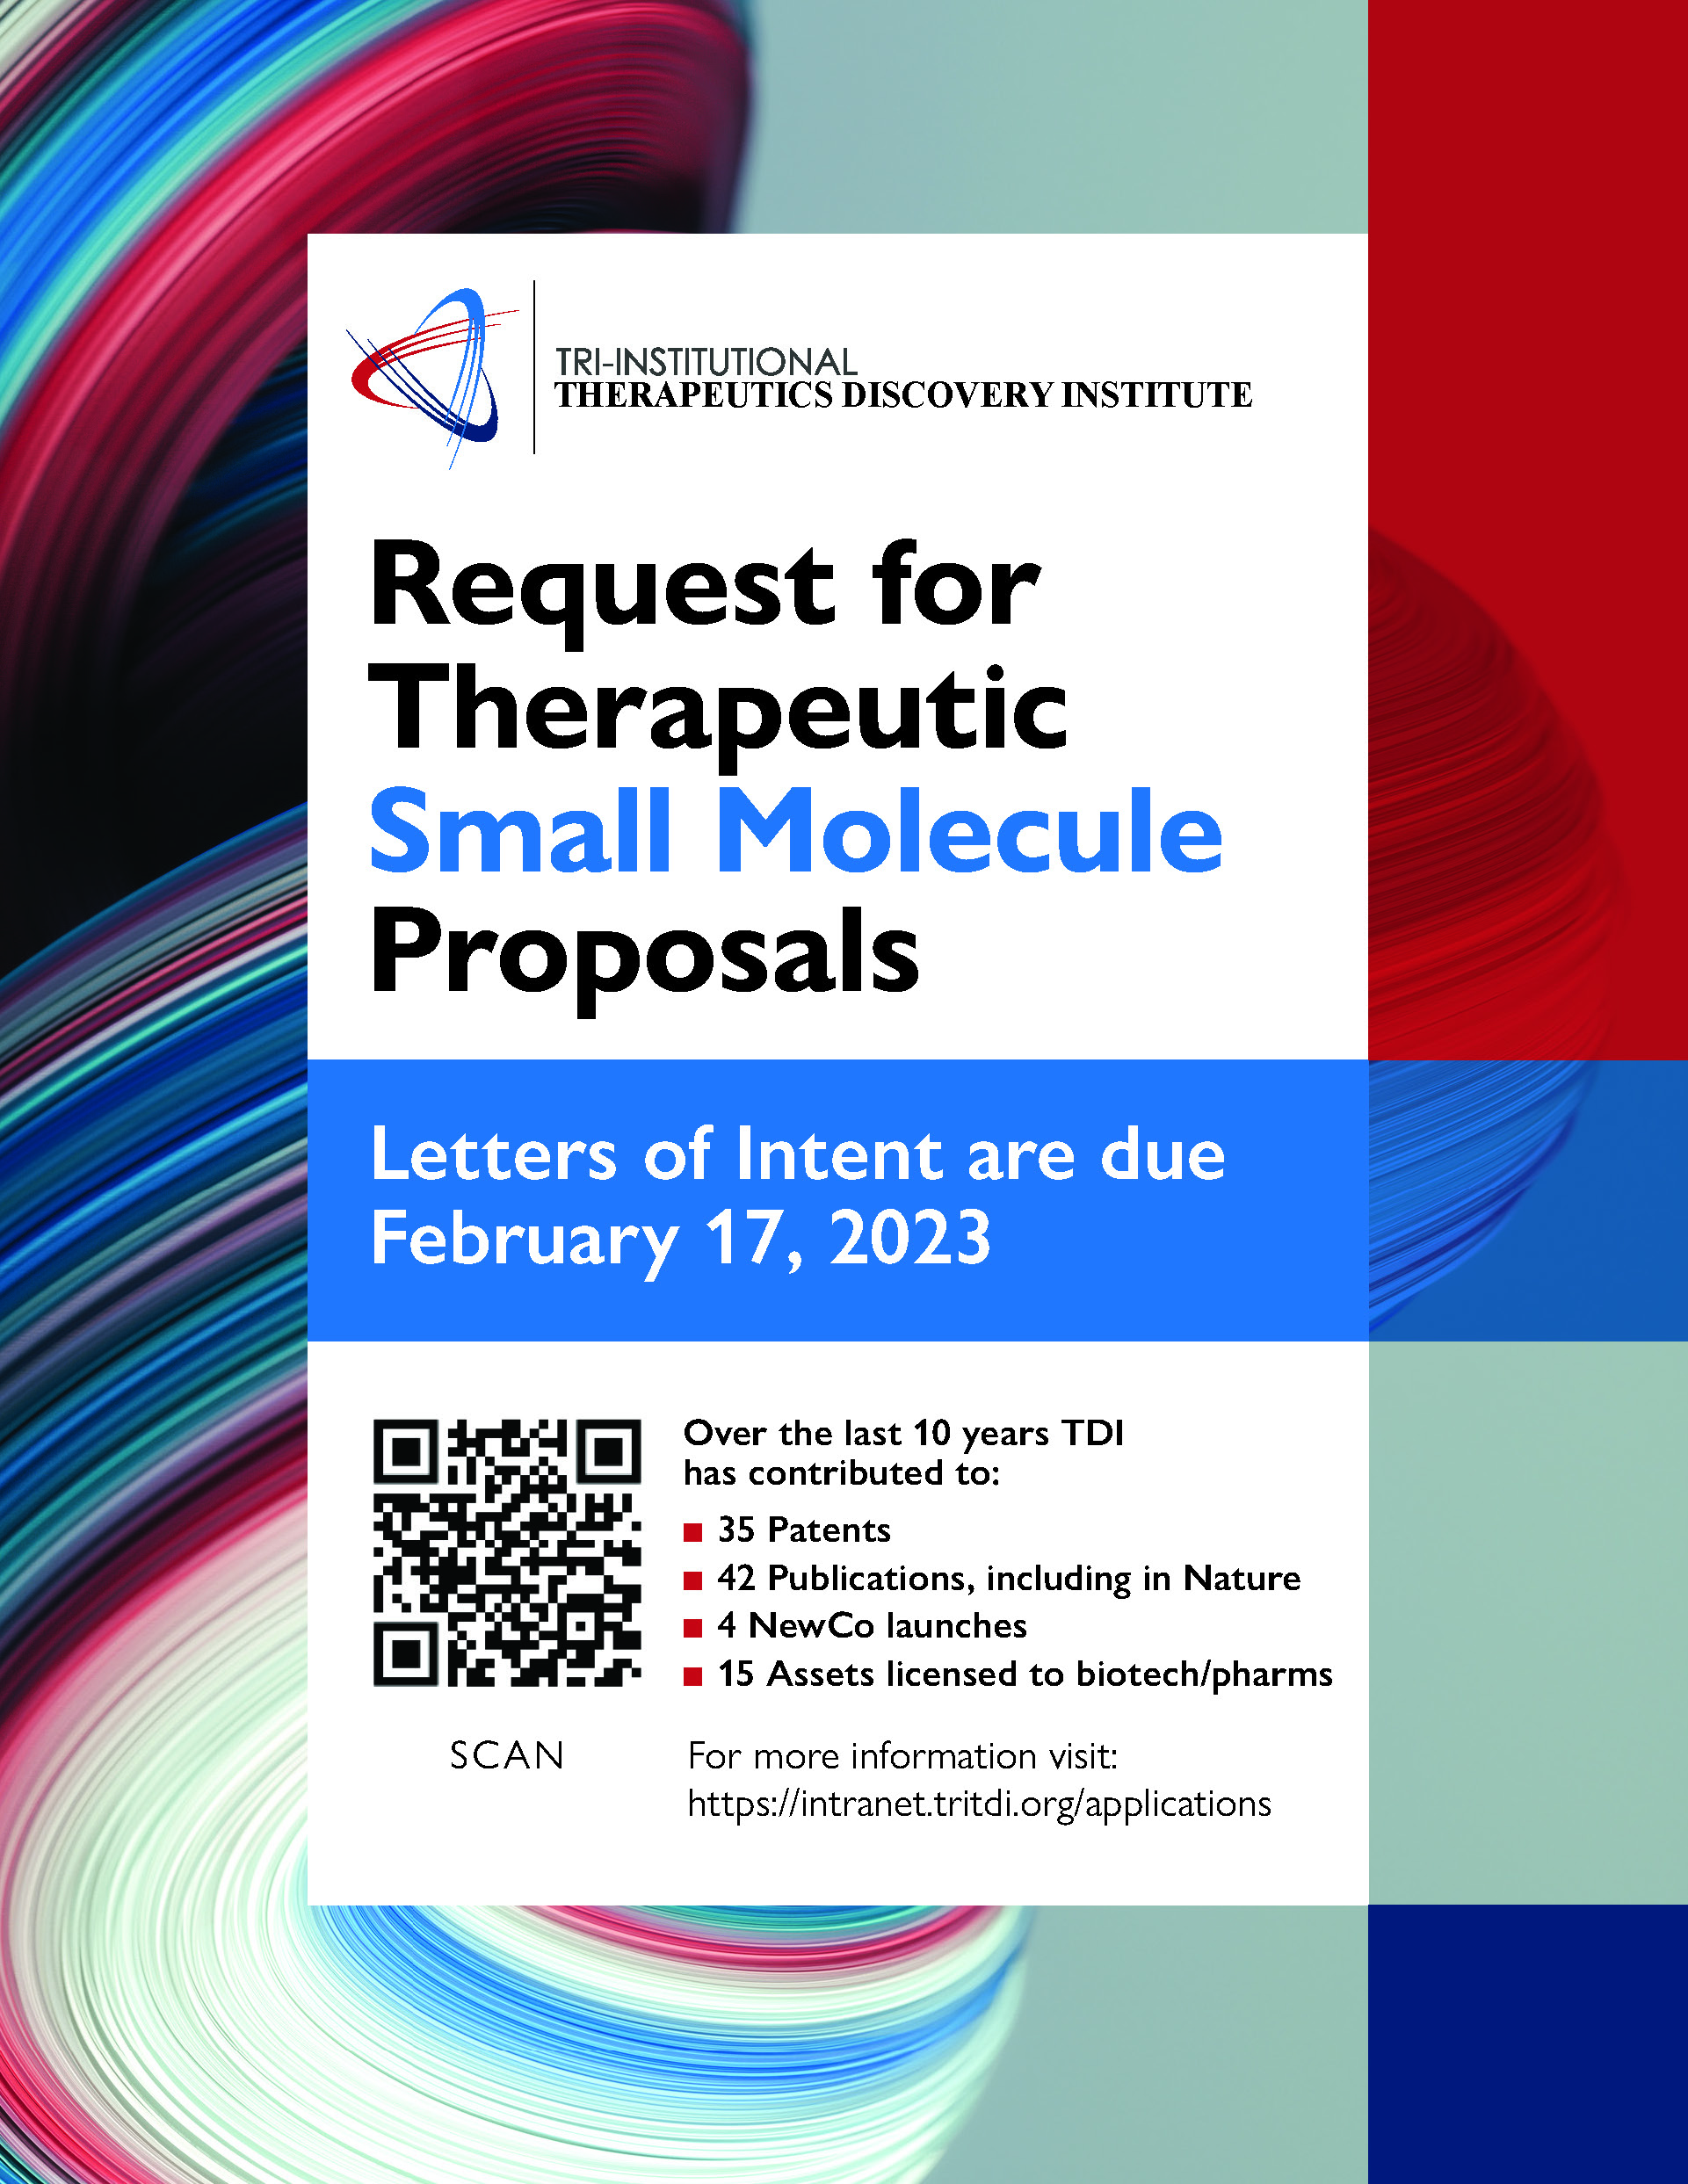 Small molecule request for proposal flyer with TDI logo, deadline and application QR code